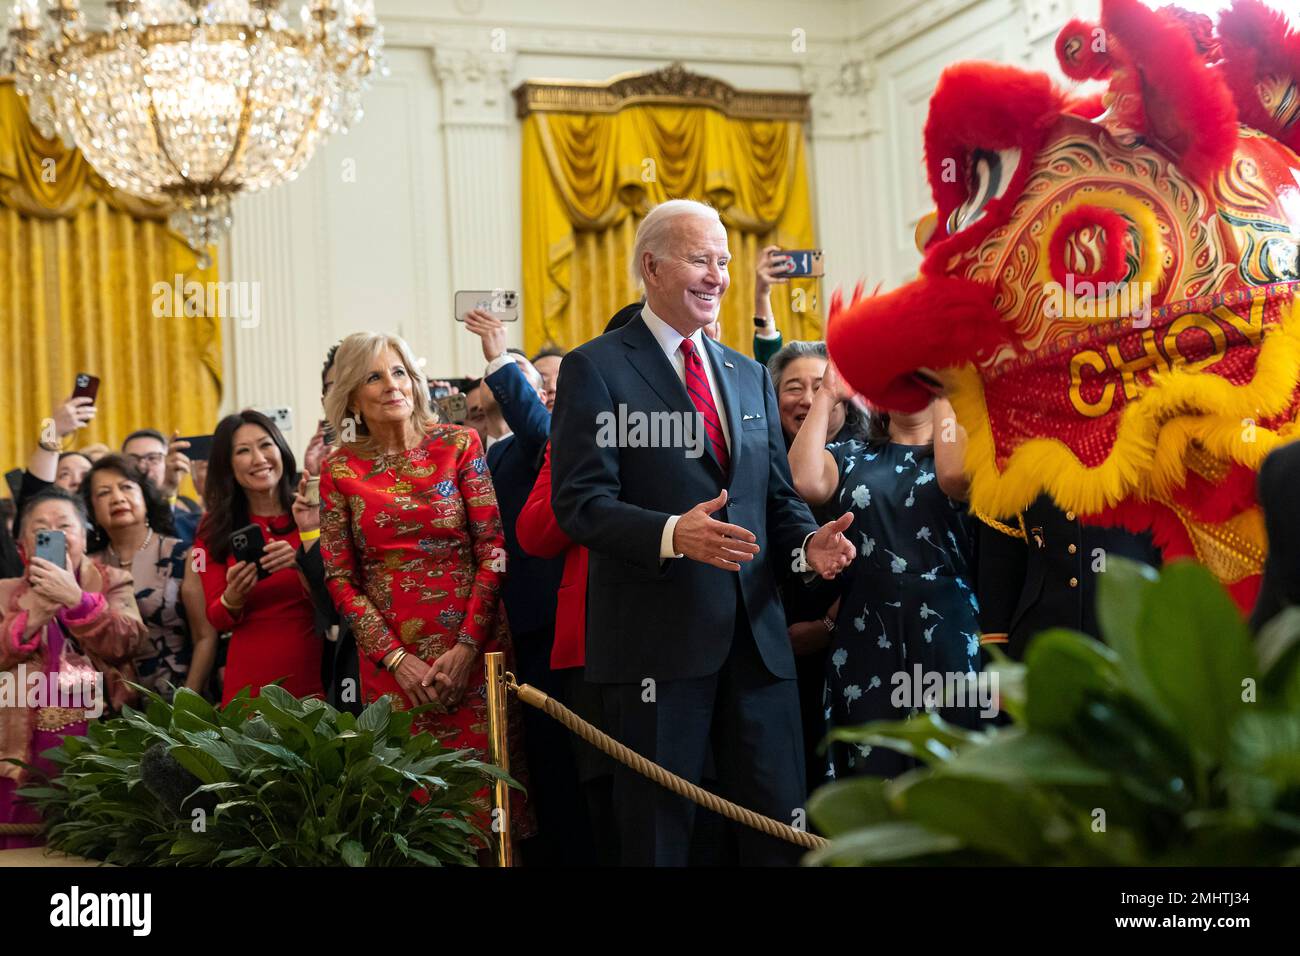 Washington, United States Of America. 26th Jan, 2023. Washington, United States of America. 26 January, 2023. U.S President Joe Biden reacts to performers wearing a traditional Chinese lion costume during a reception to celebrate the Lunar New Year in the East Room of the White House, January 26, 2023 in Washington, DC Biden hosted the first-ever Lunar New Year reception at the White House. Credit: Katie Ricks/White House Photo/Alamy Live News Stock Photo